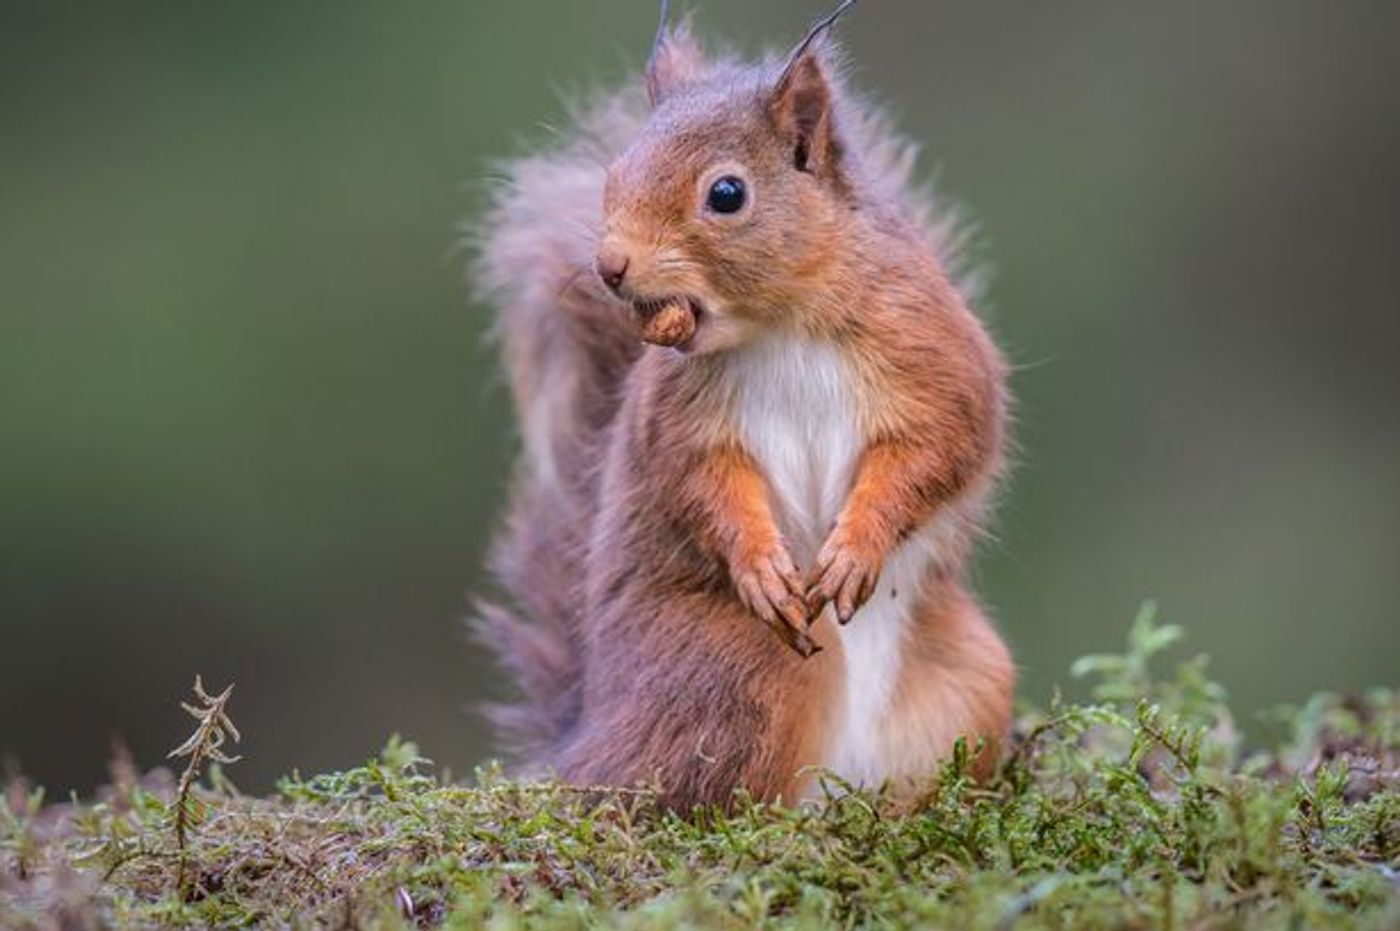 Red squirrels throughout the UK are reportedly carrying different forms of Leprosy.